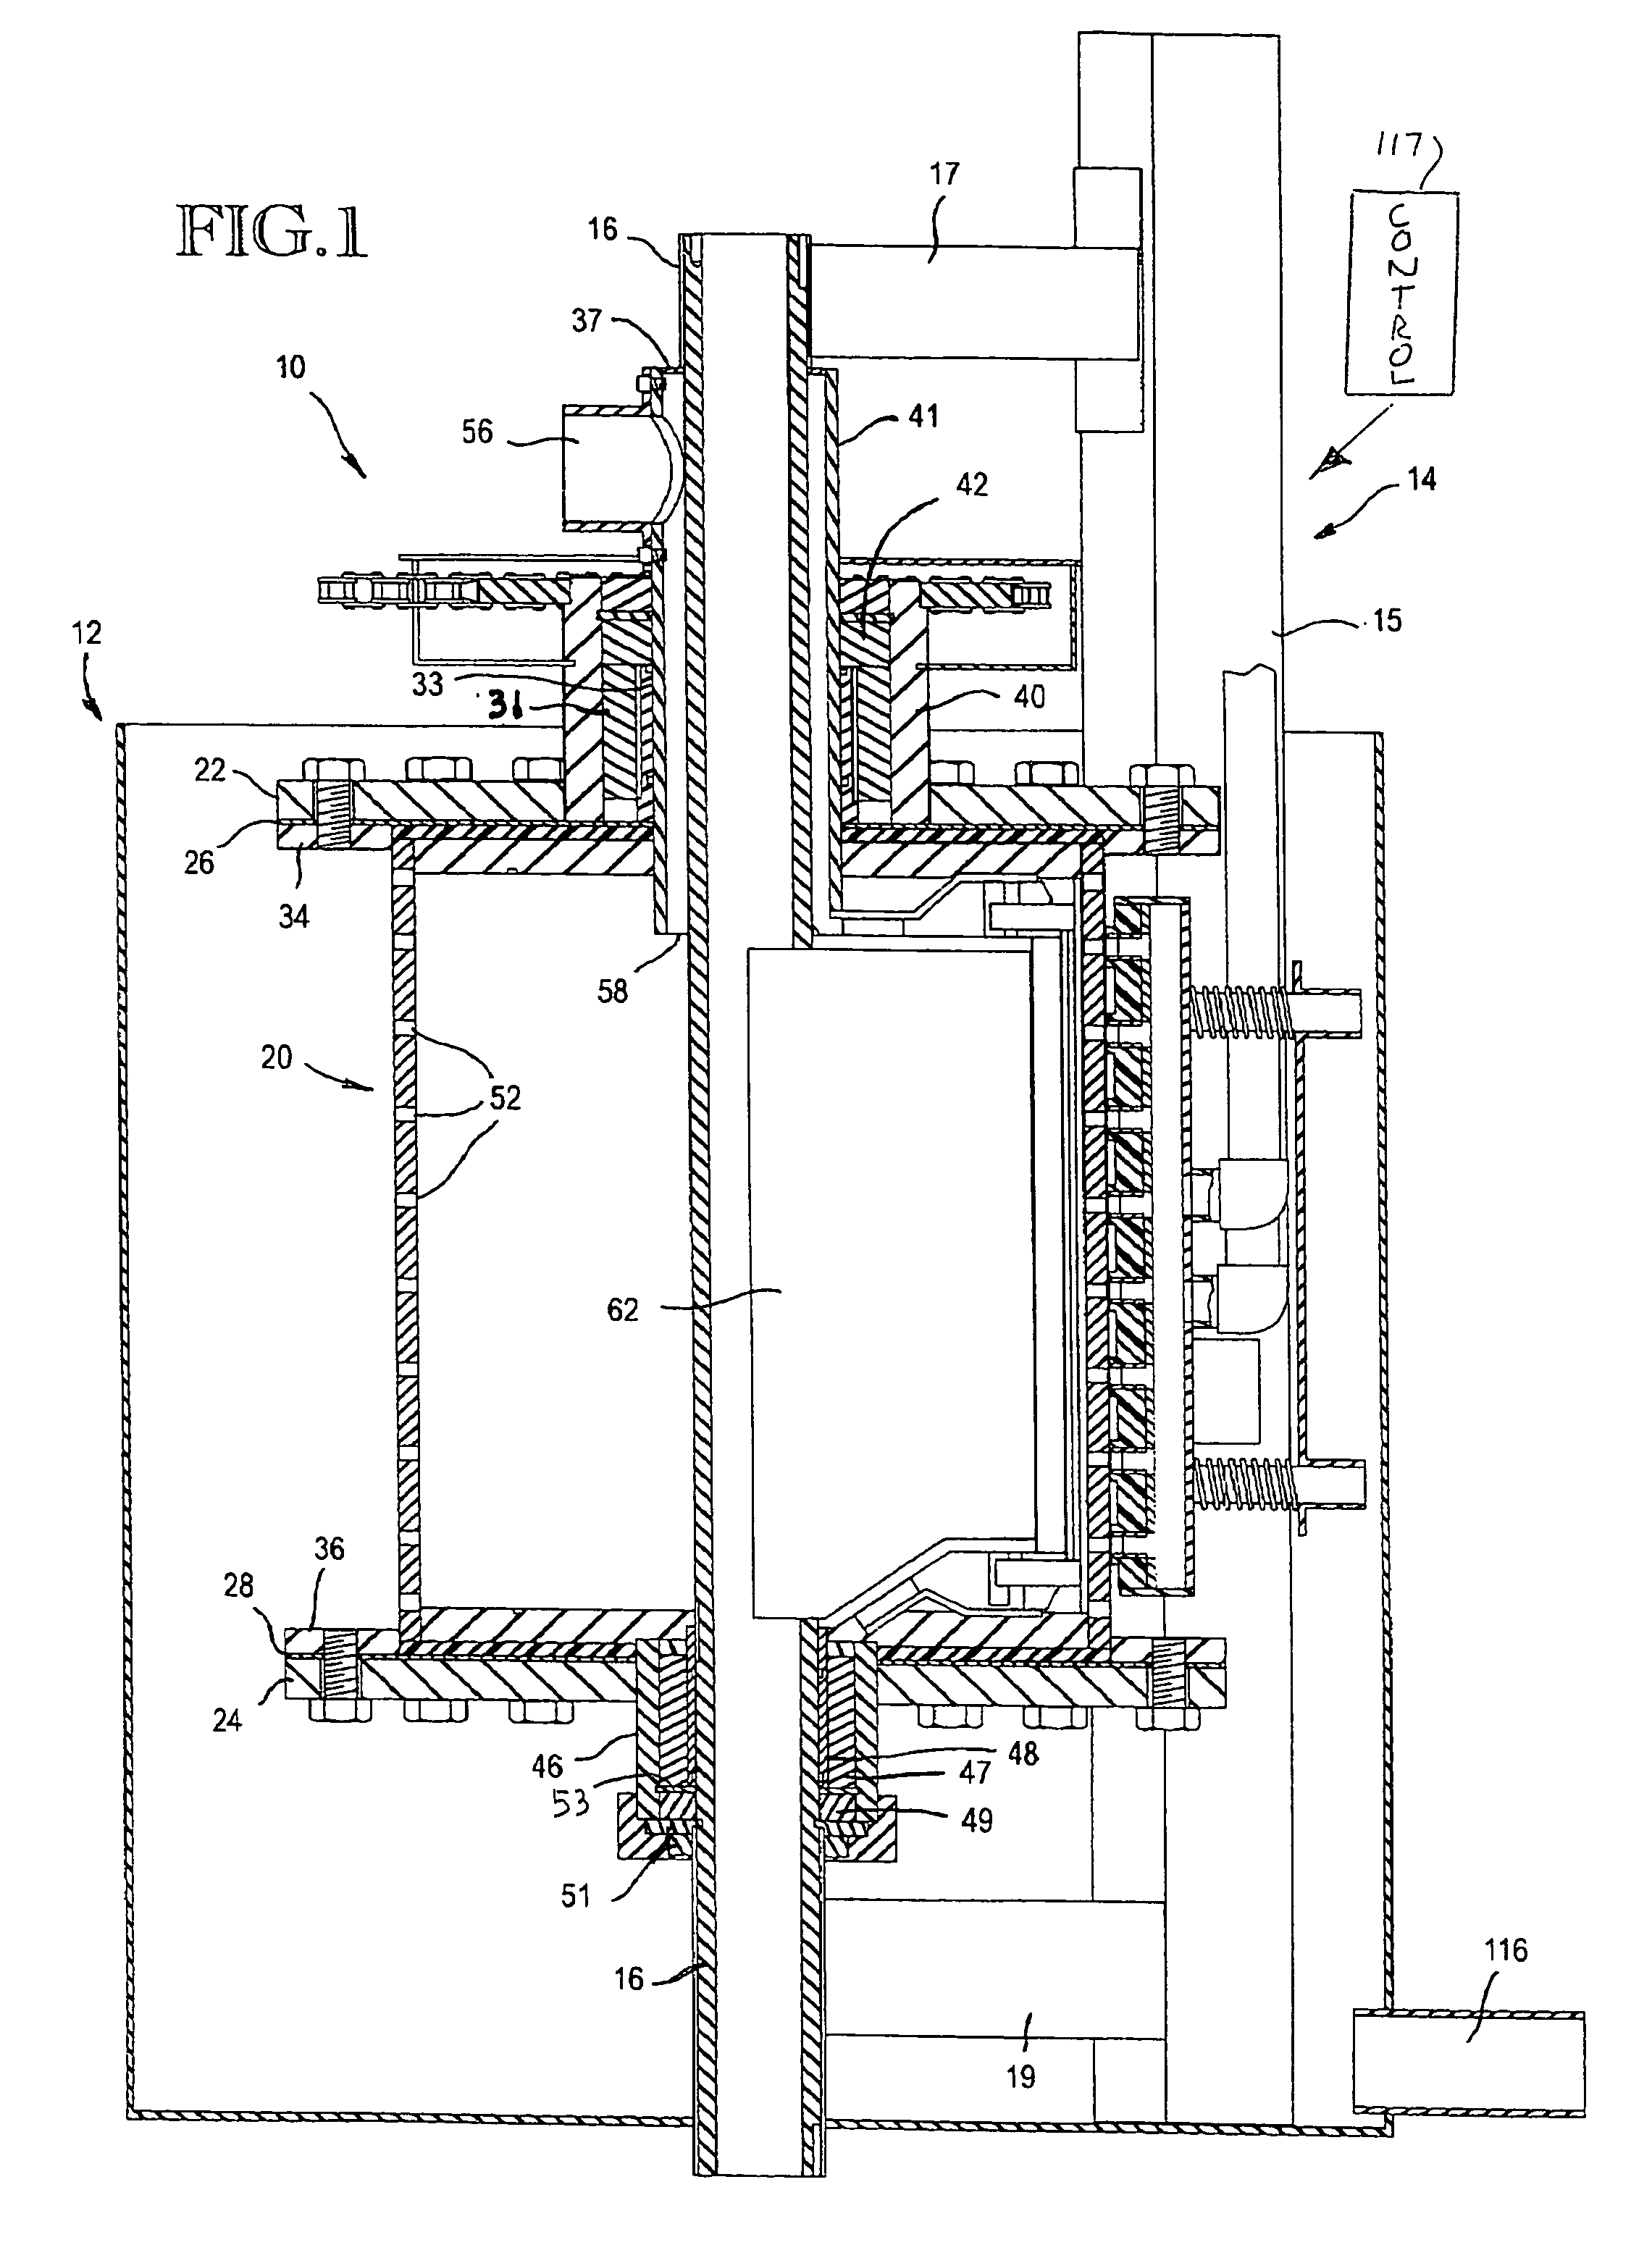 Self-cleaning, continuously operating filter apparatus for fluids